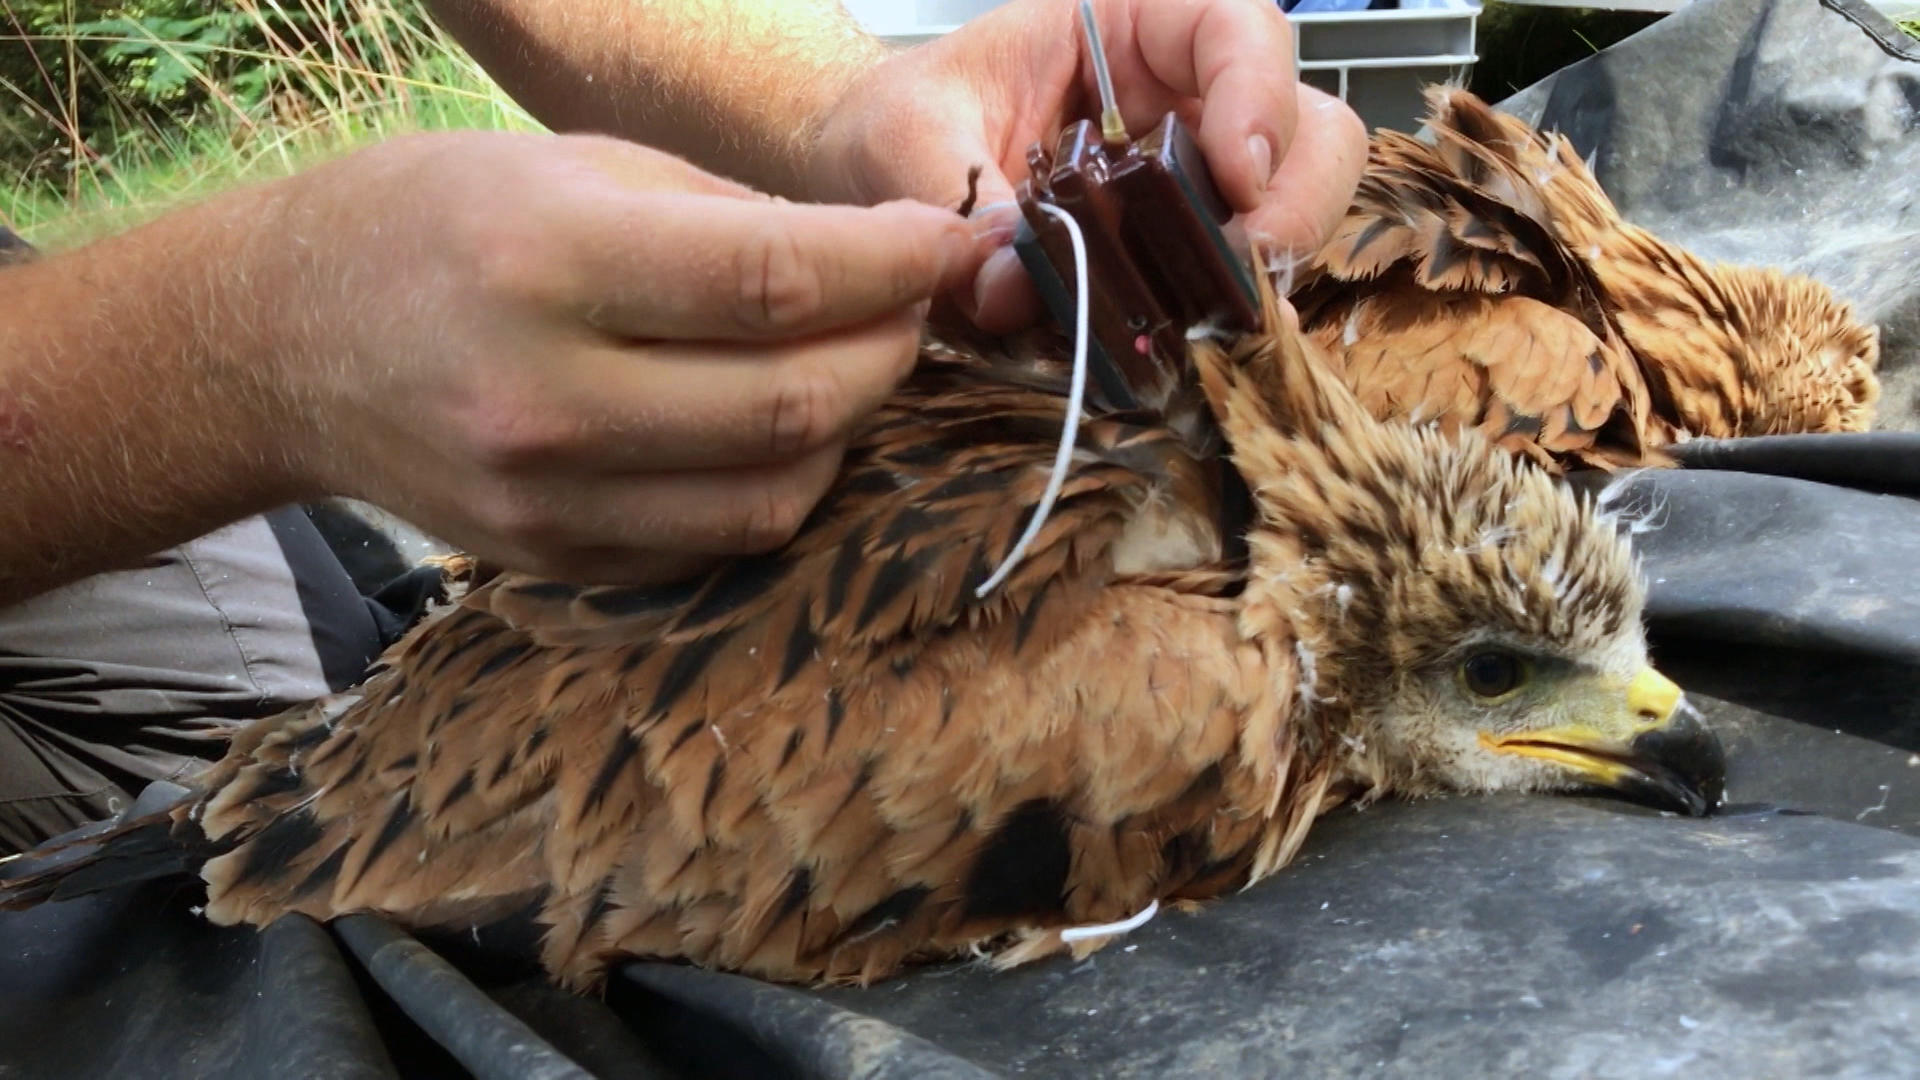 An ornithologist instals a tracking device on the back of a red kite.